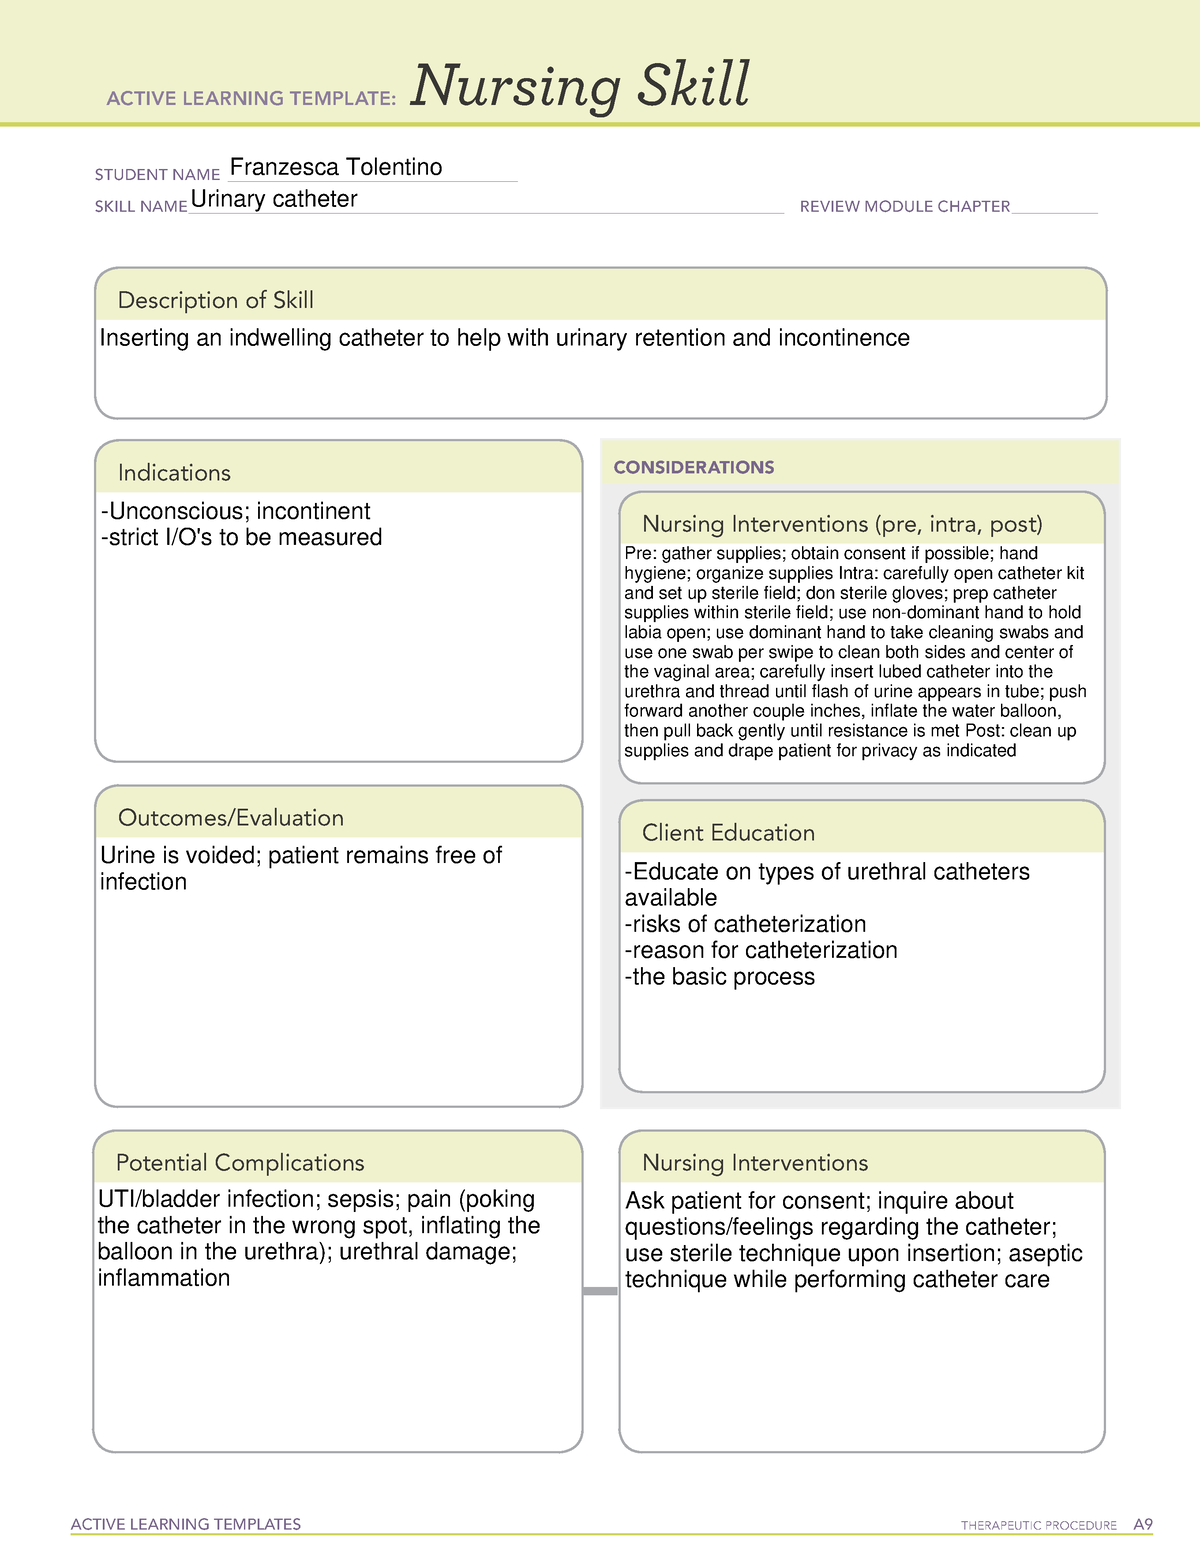 Active Learning Template Nursing Skill form Urinarycatheter ACTIVE